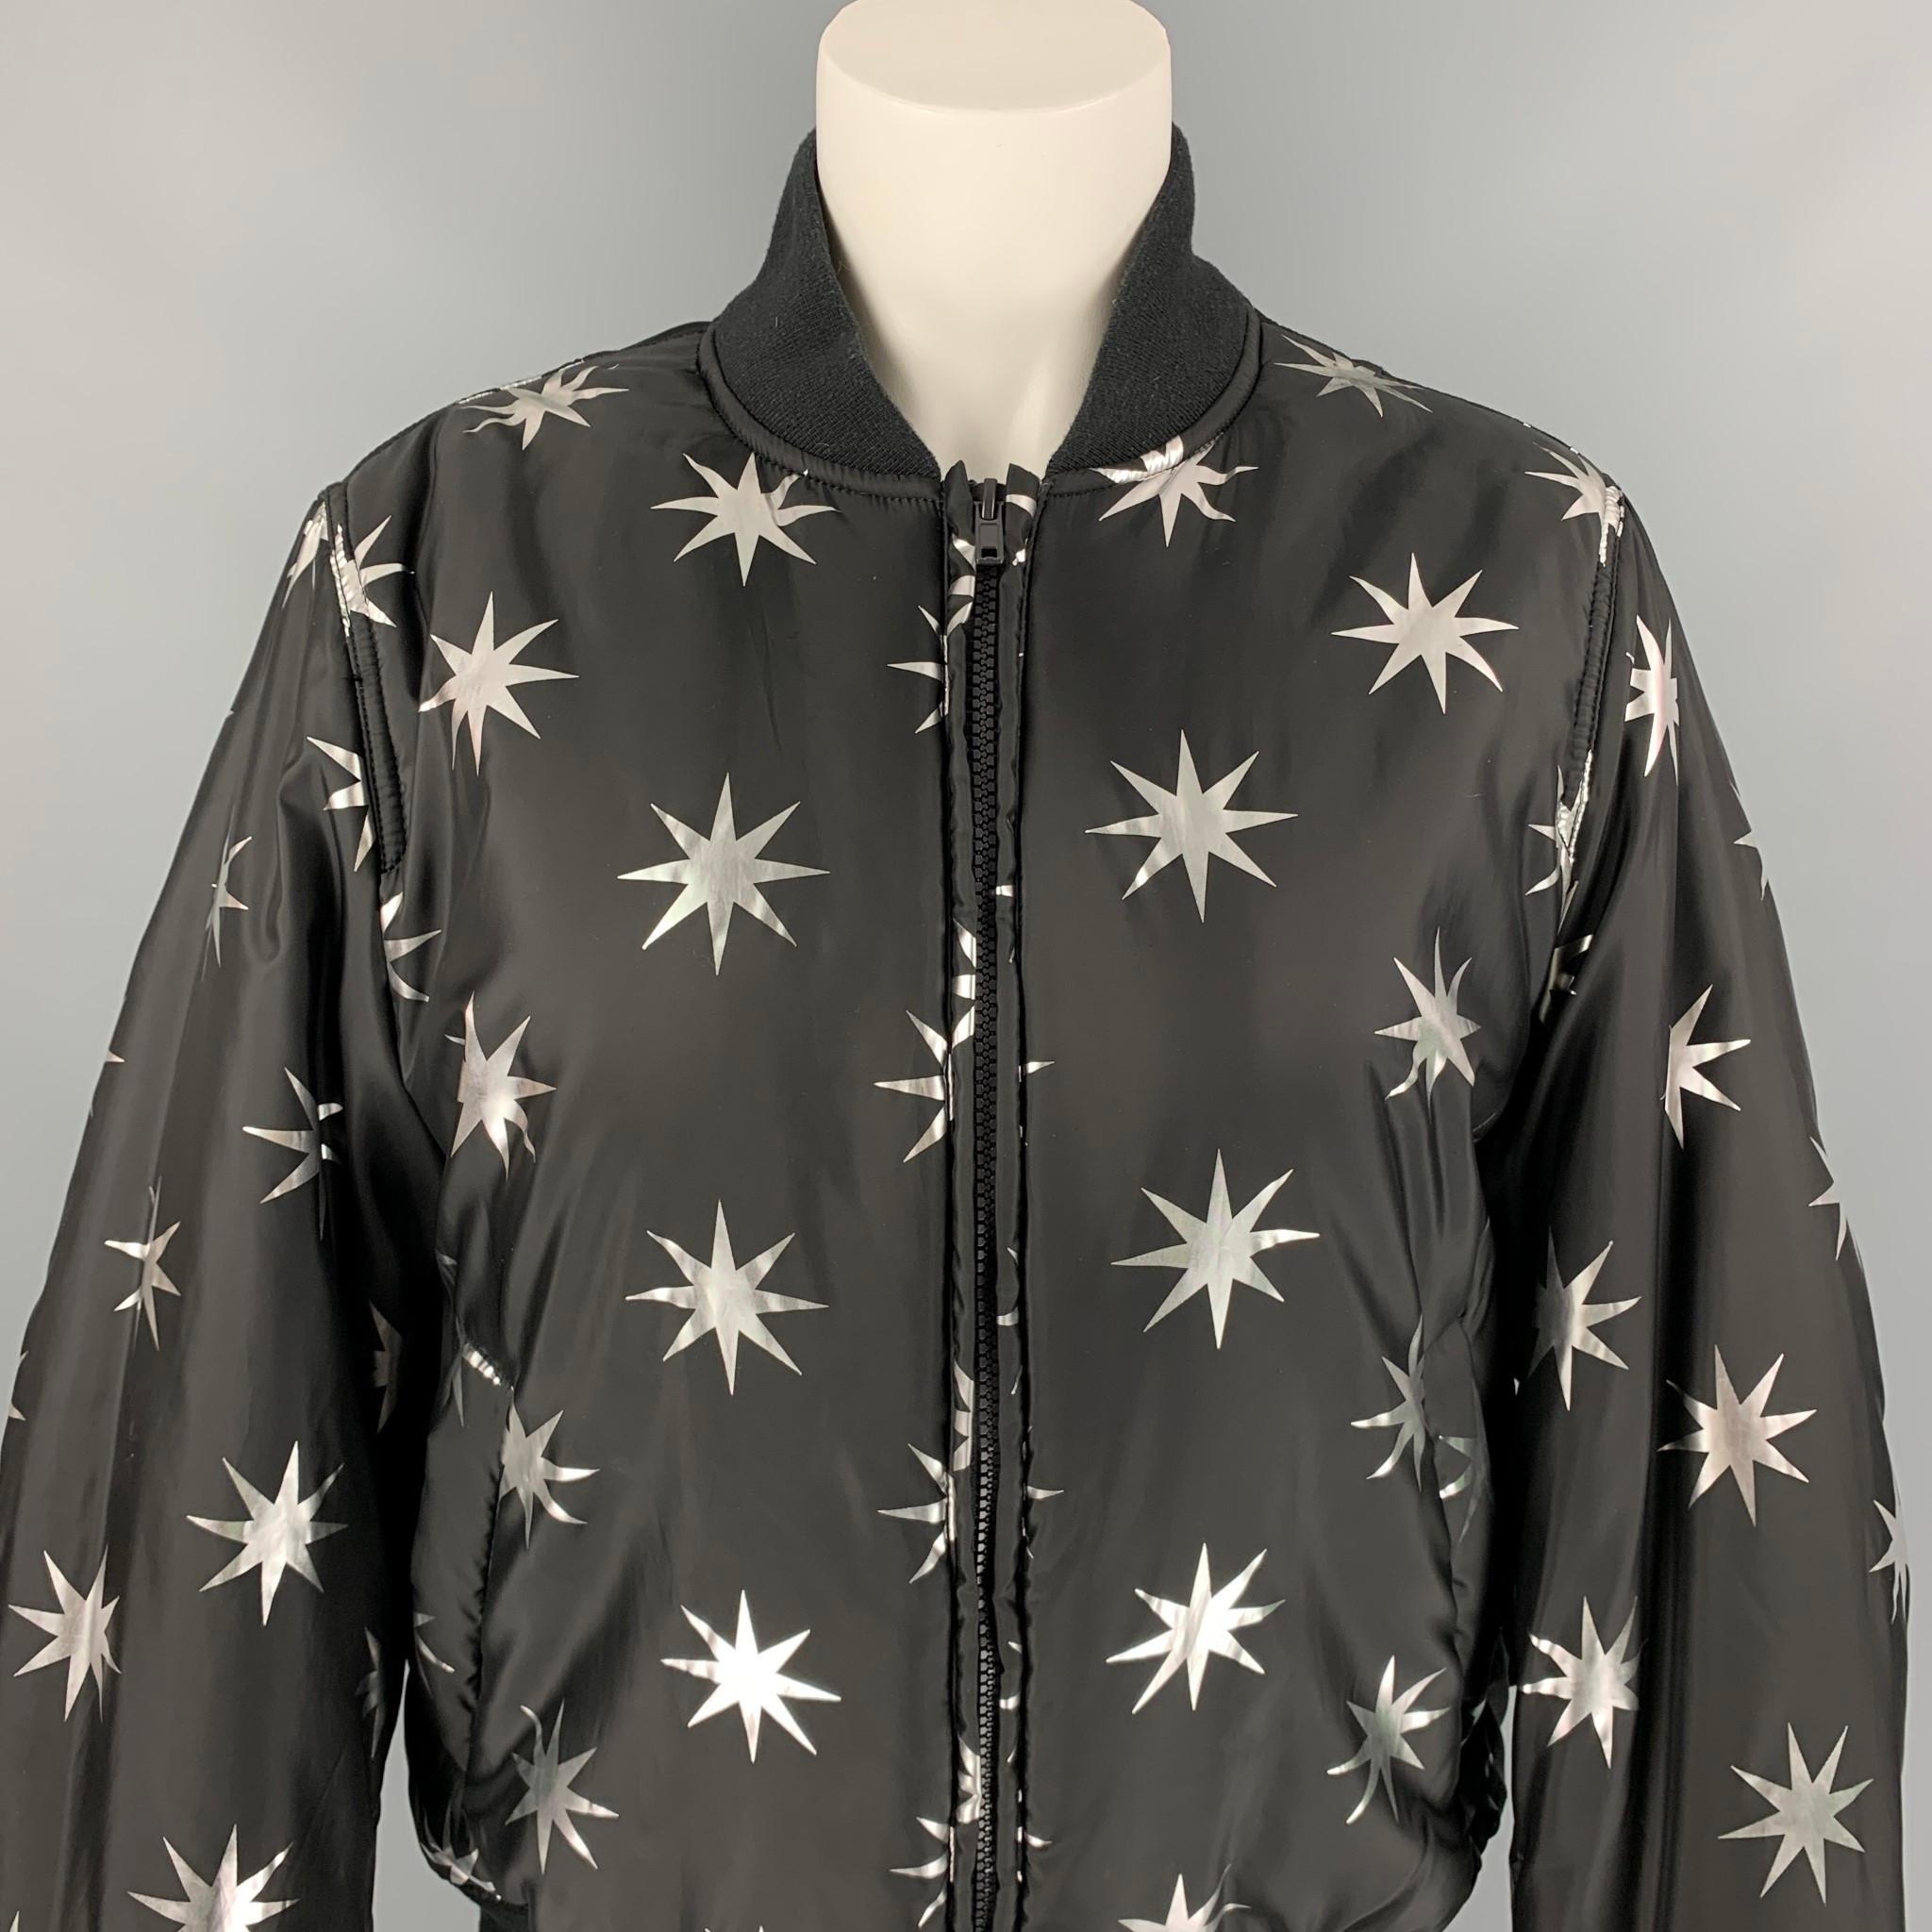 LOVE MOSCHINO jacket comes in a black & silver star print polyester featuring a bomber style, ribbed hem, slit pockets, and a full zip closure. 

Very Good Pre-Owned Condition.
Marked: D 40 / GB 12 / F 40 / USA 8 / I 44

Measurements:

Shoulder: